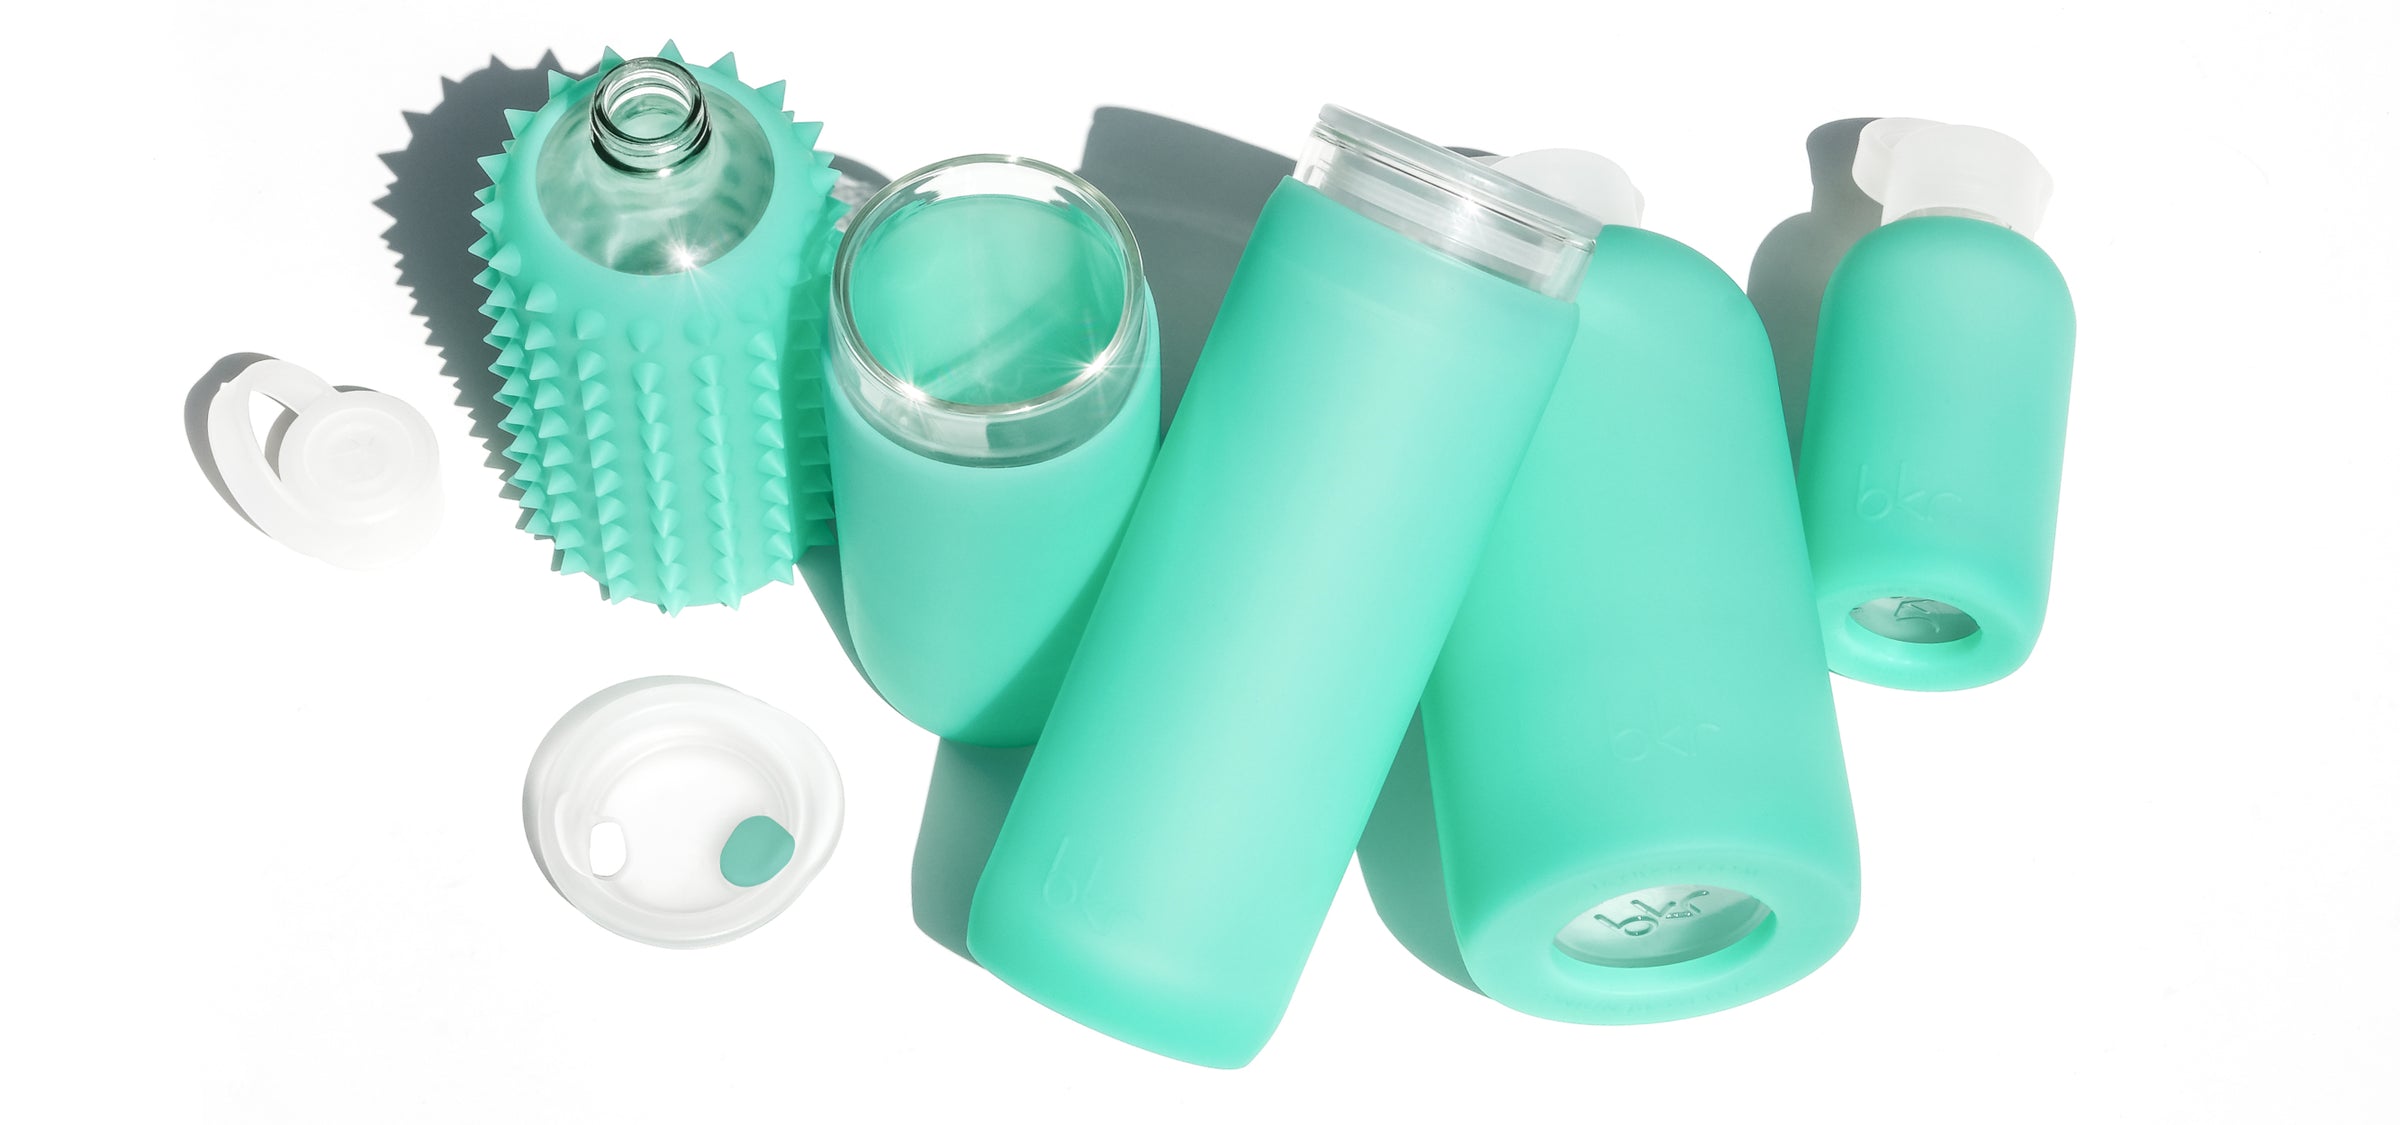 Reusable glass and silicone water bottles and insulated tumblers in sheer tropical shallow sea green.